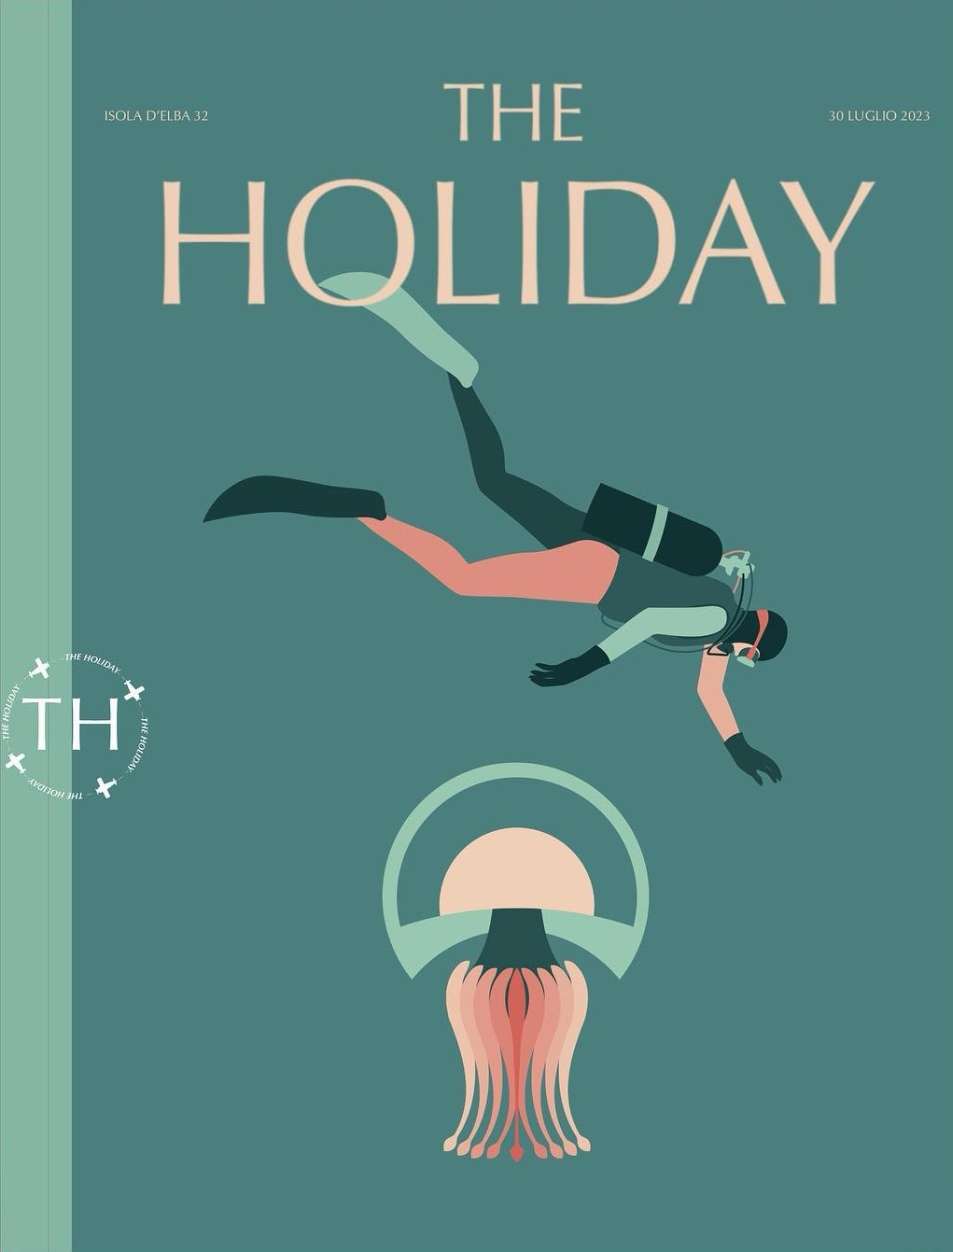 Diver (Illustration for "The Holiday")